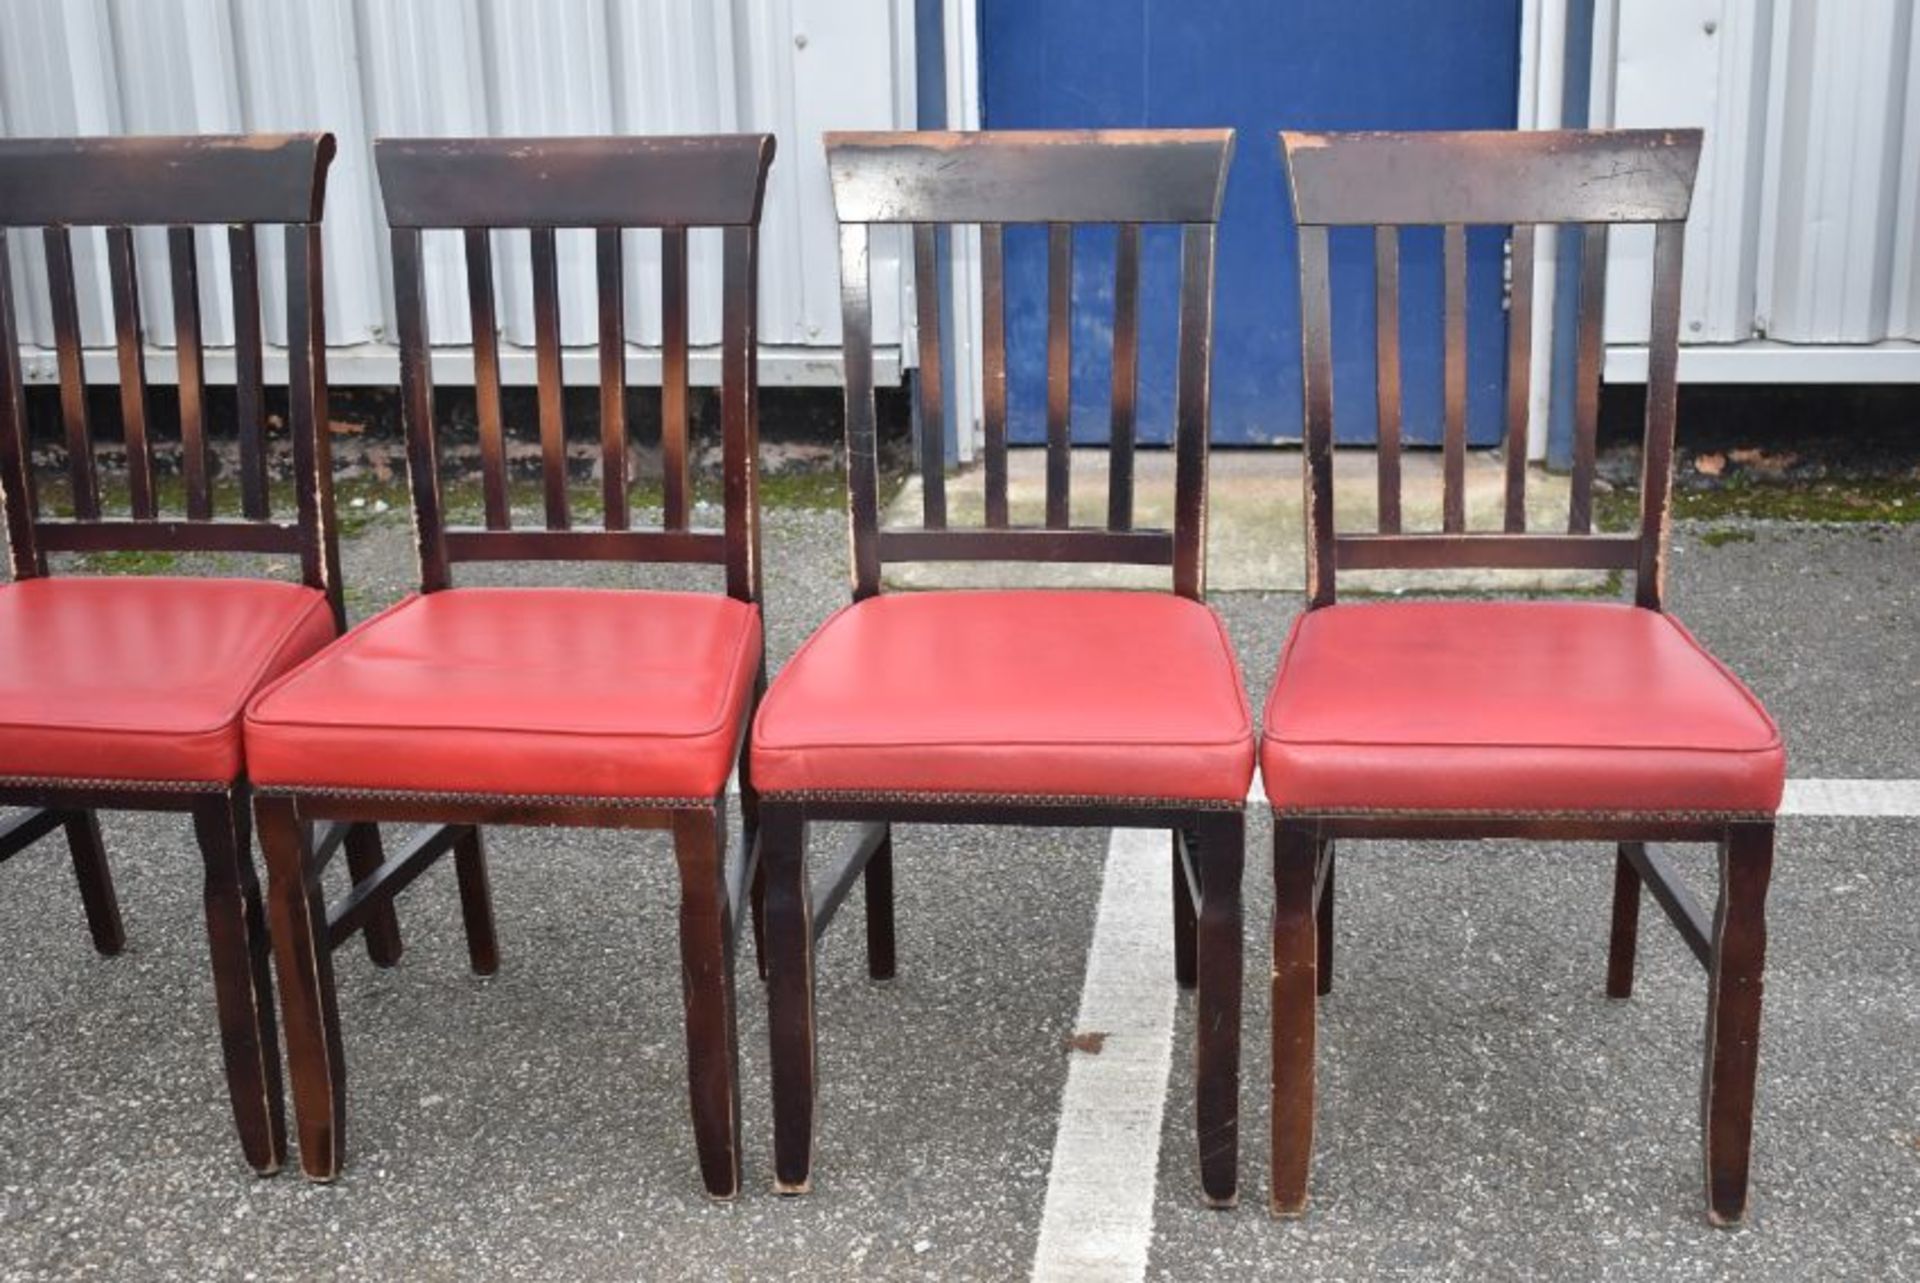 8 x Restaurant Dining Chairs With Dark Stained Wood Finish and Red Leather Seat Pads - Recently Remo - Image 5 of 6